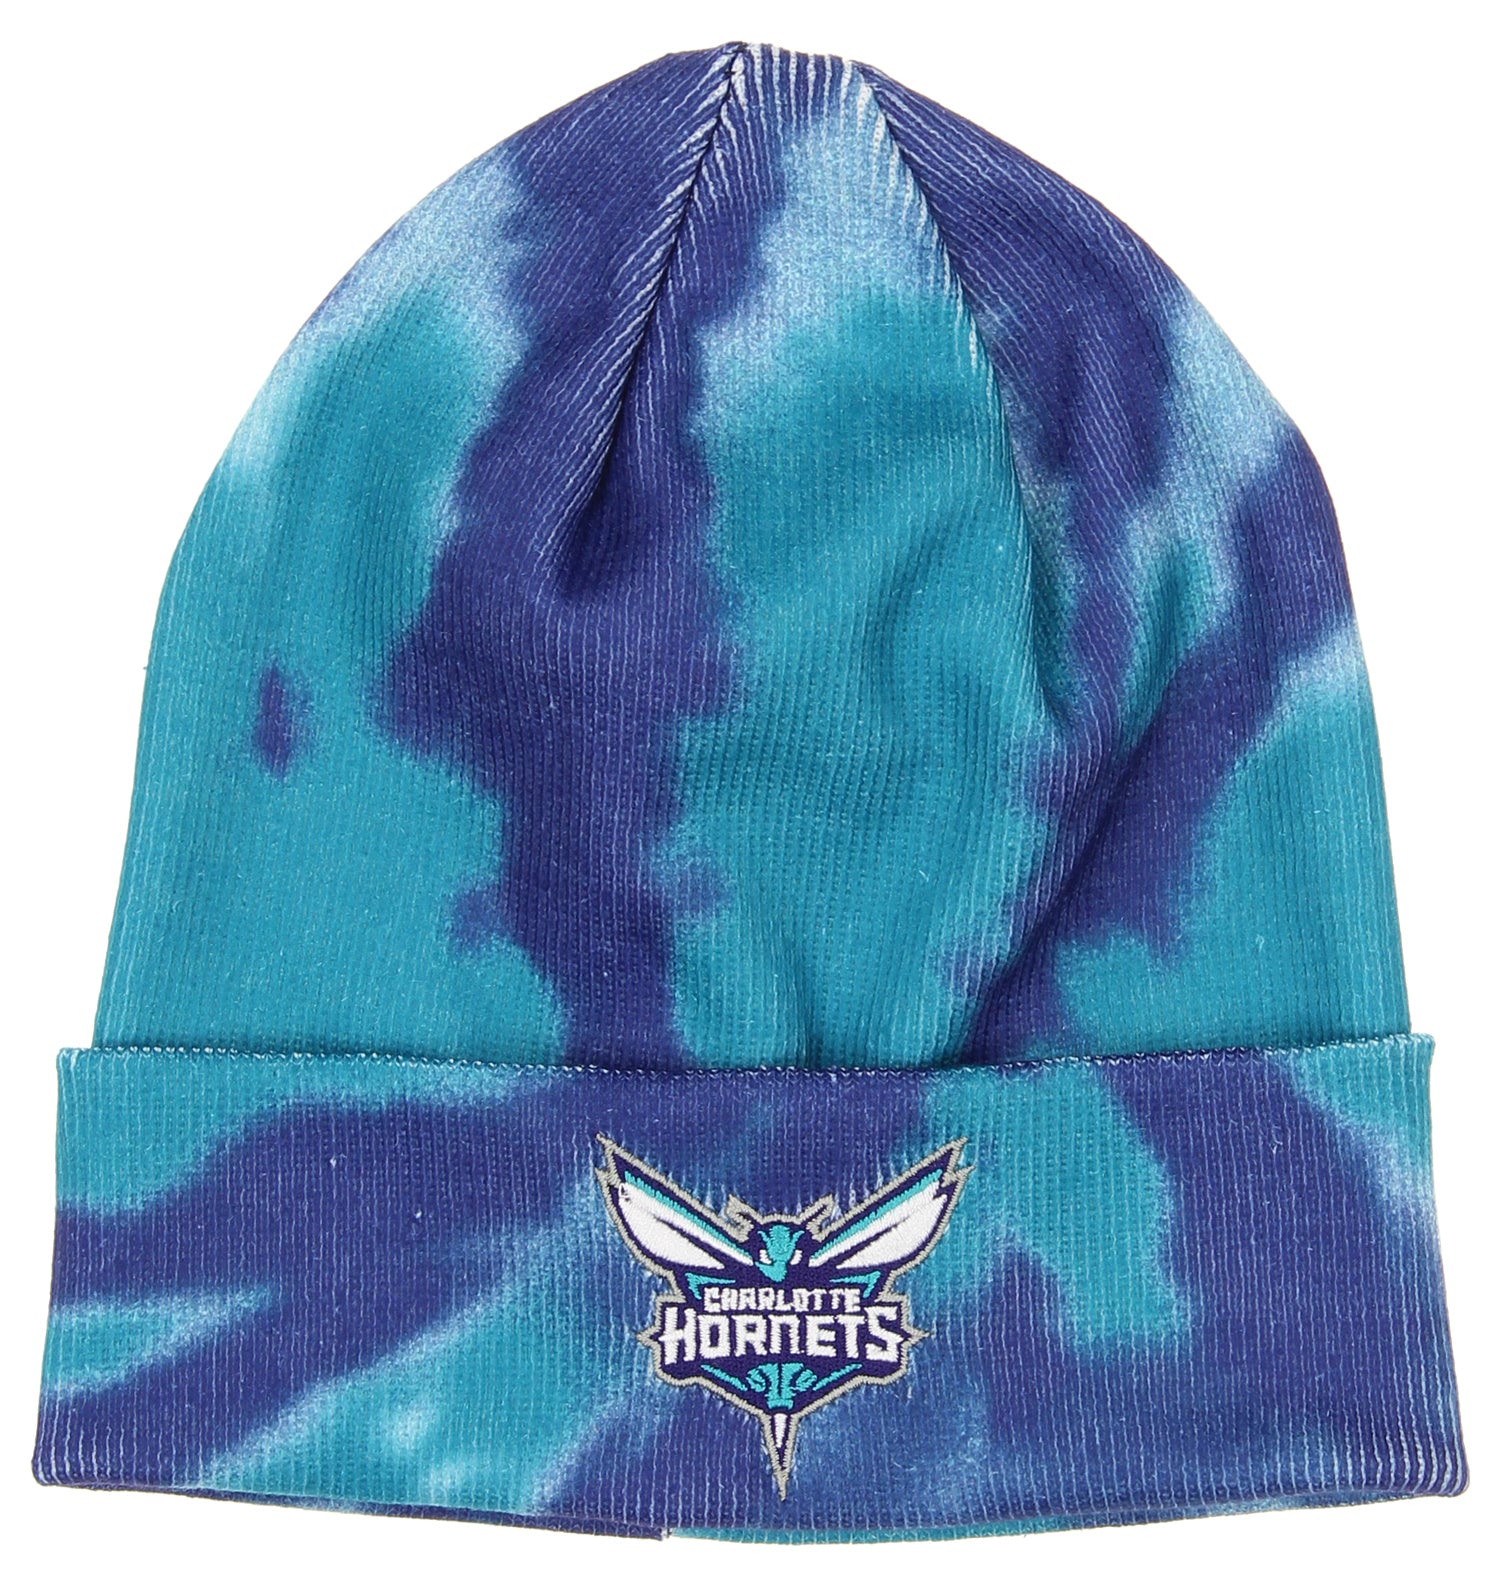 Mitchell and Ness NBA Charlotte Hornets Knit Beanie Winter Hat